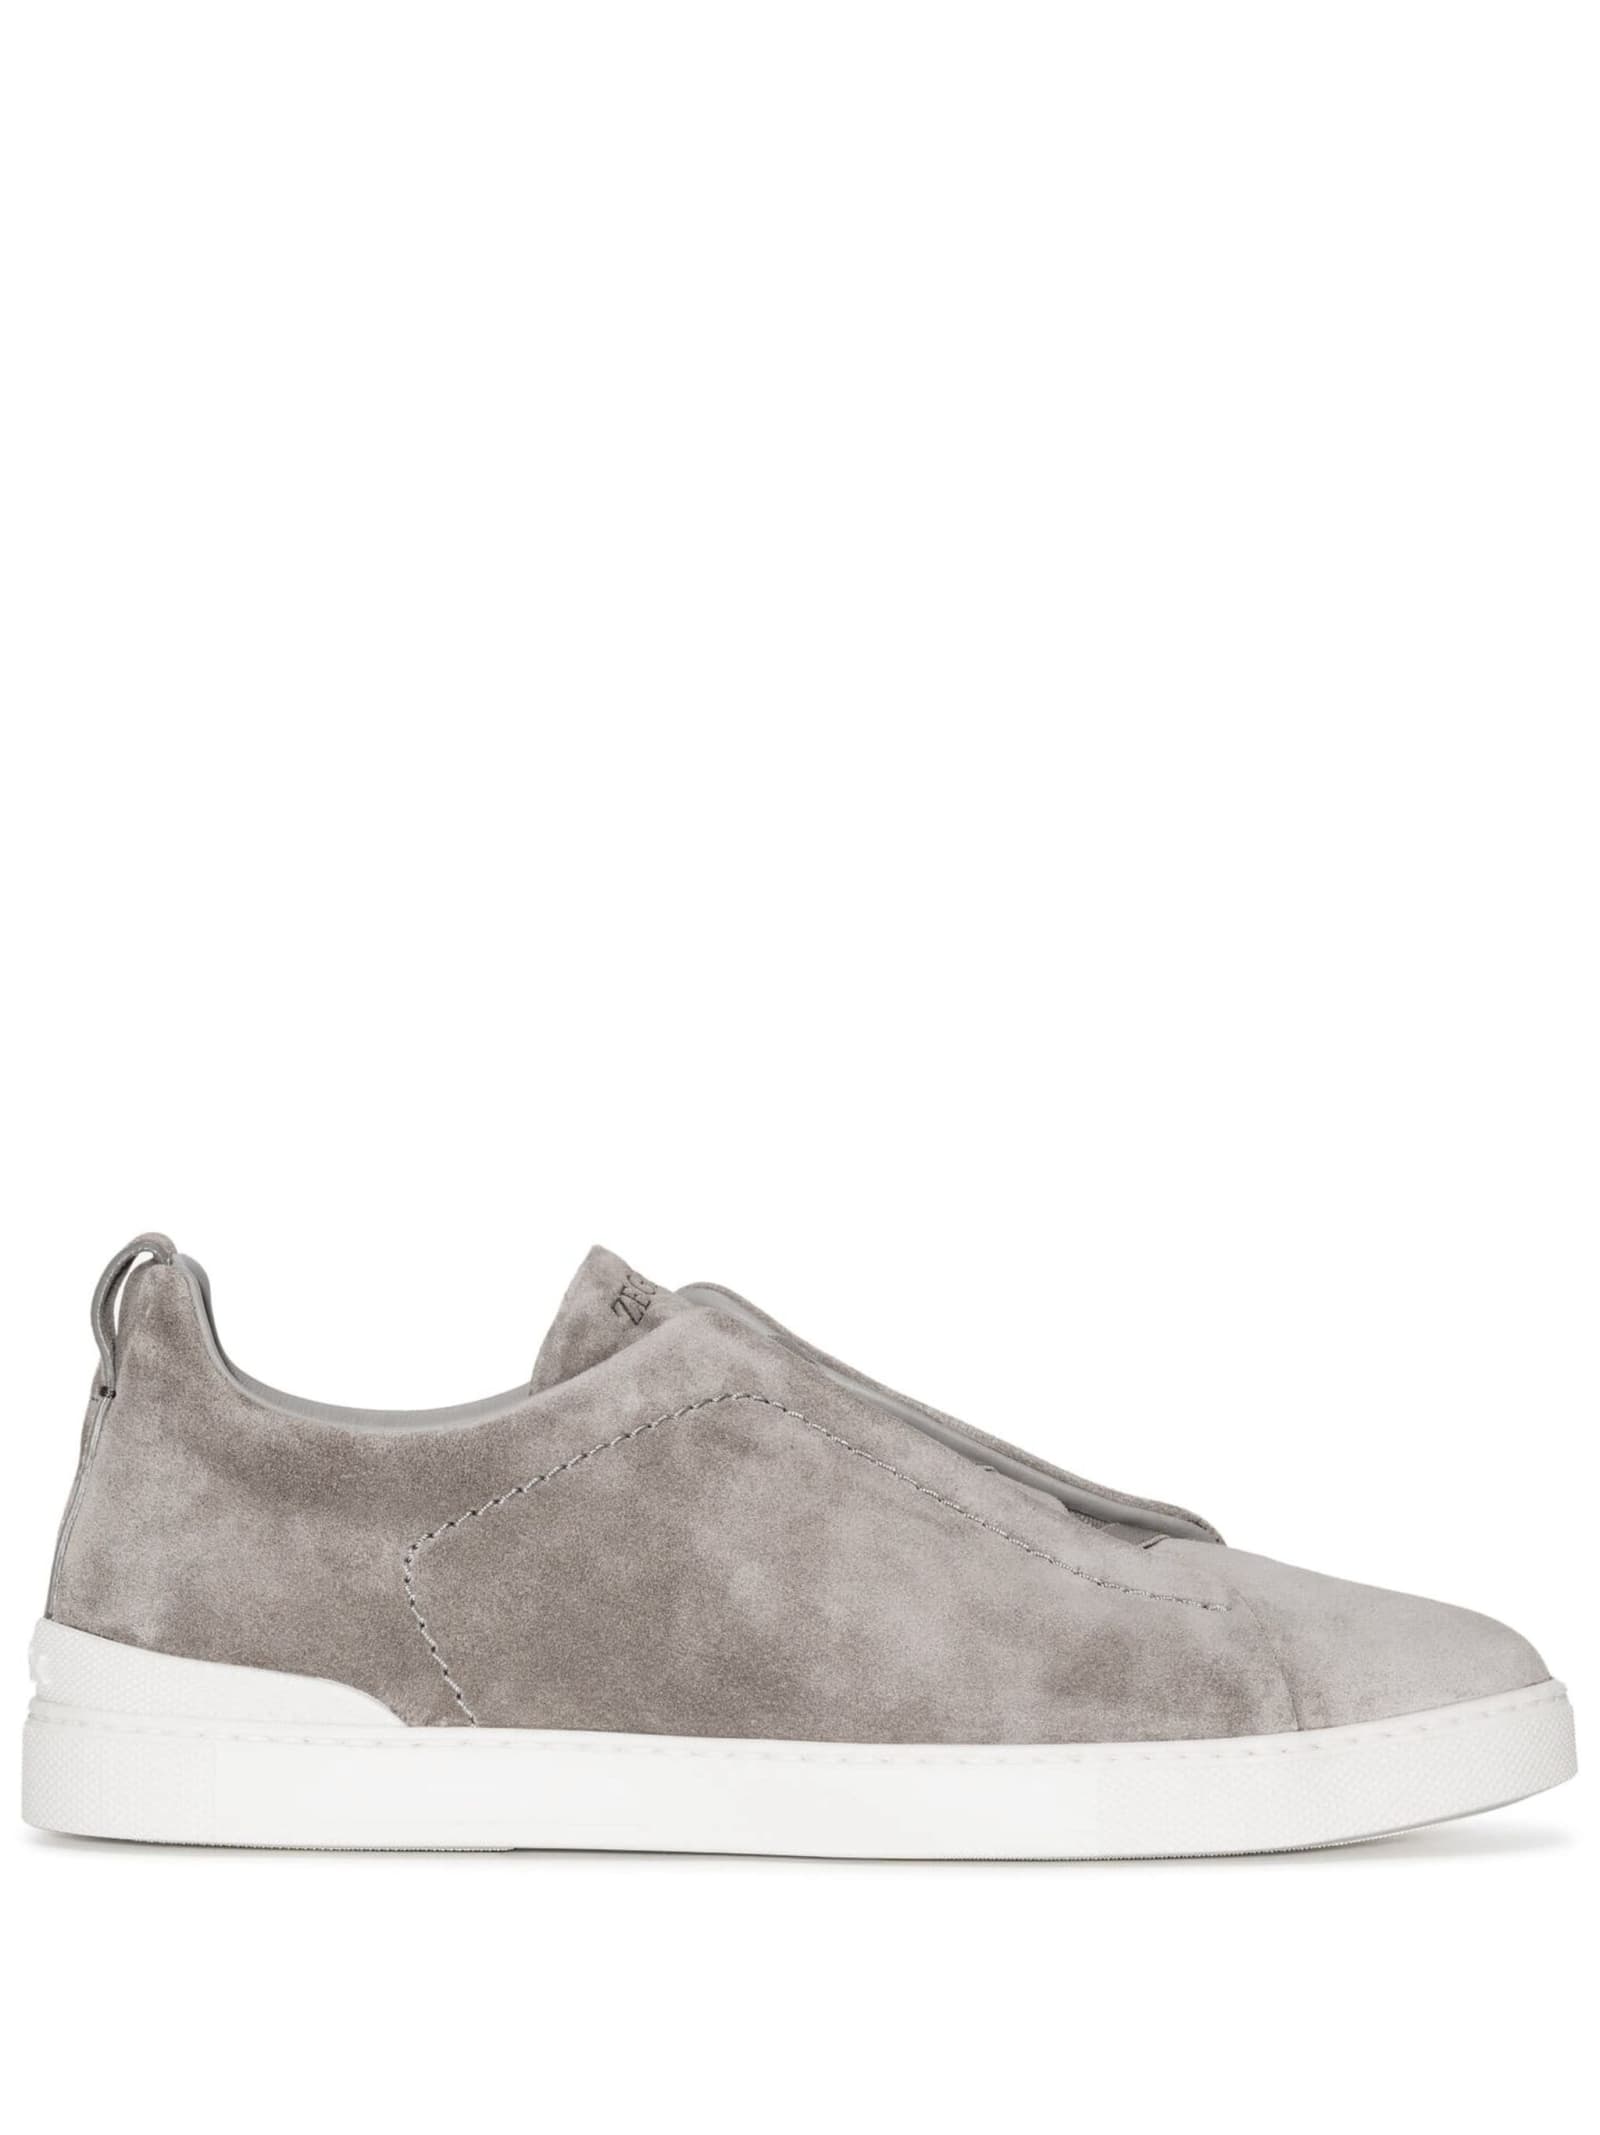 ZEGNA TRIPLE STITCH SNEAKERS IN GREY SUEDE